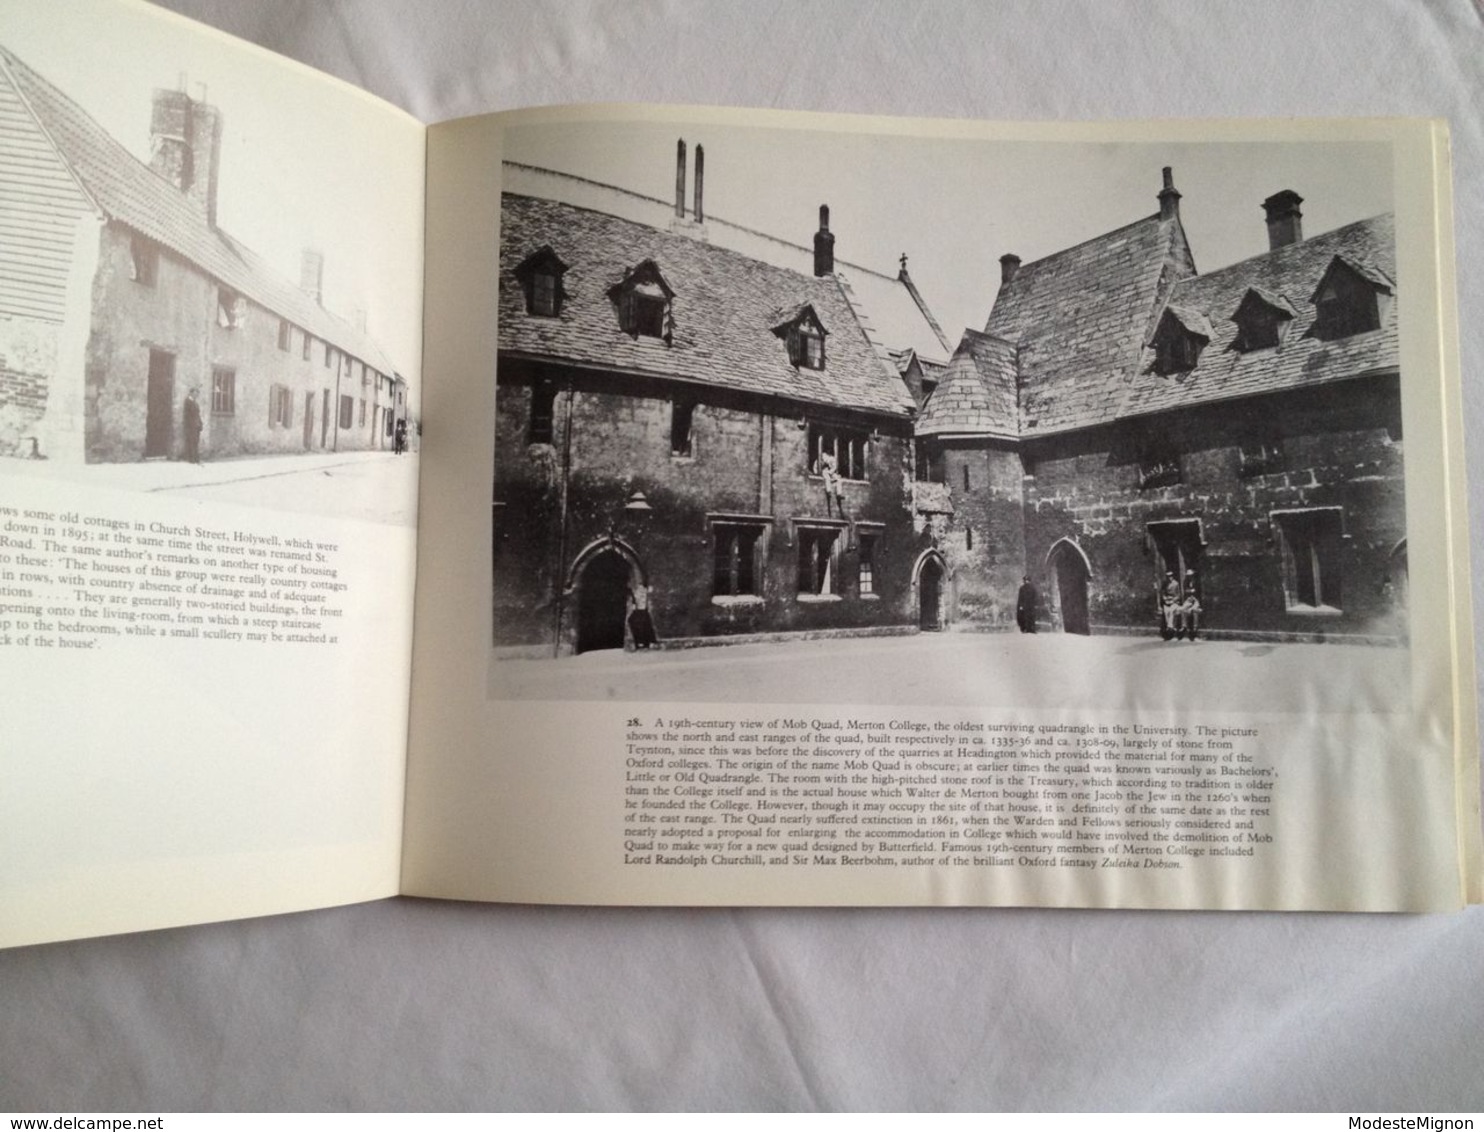 Oxford As It Was By Robert G. Neville And Tony Sloggett - Europa